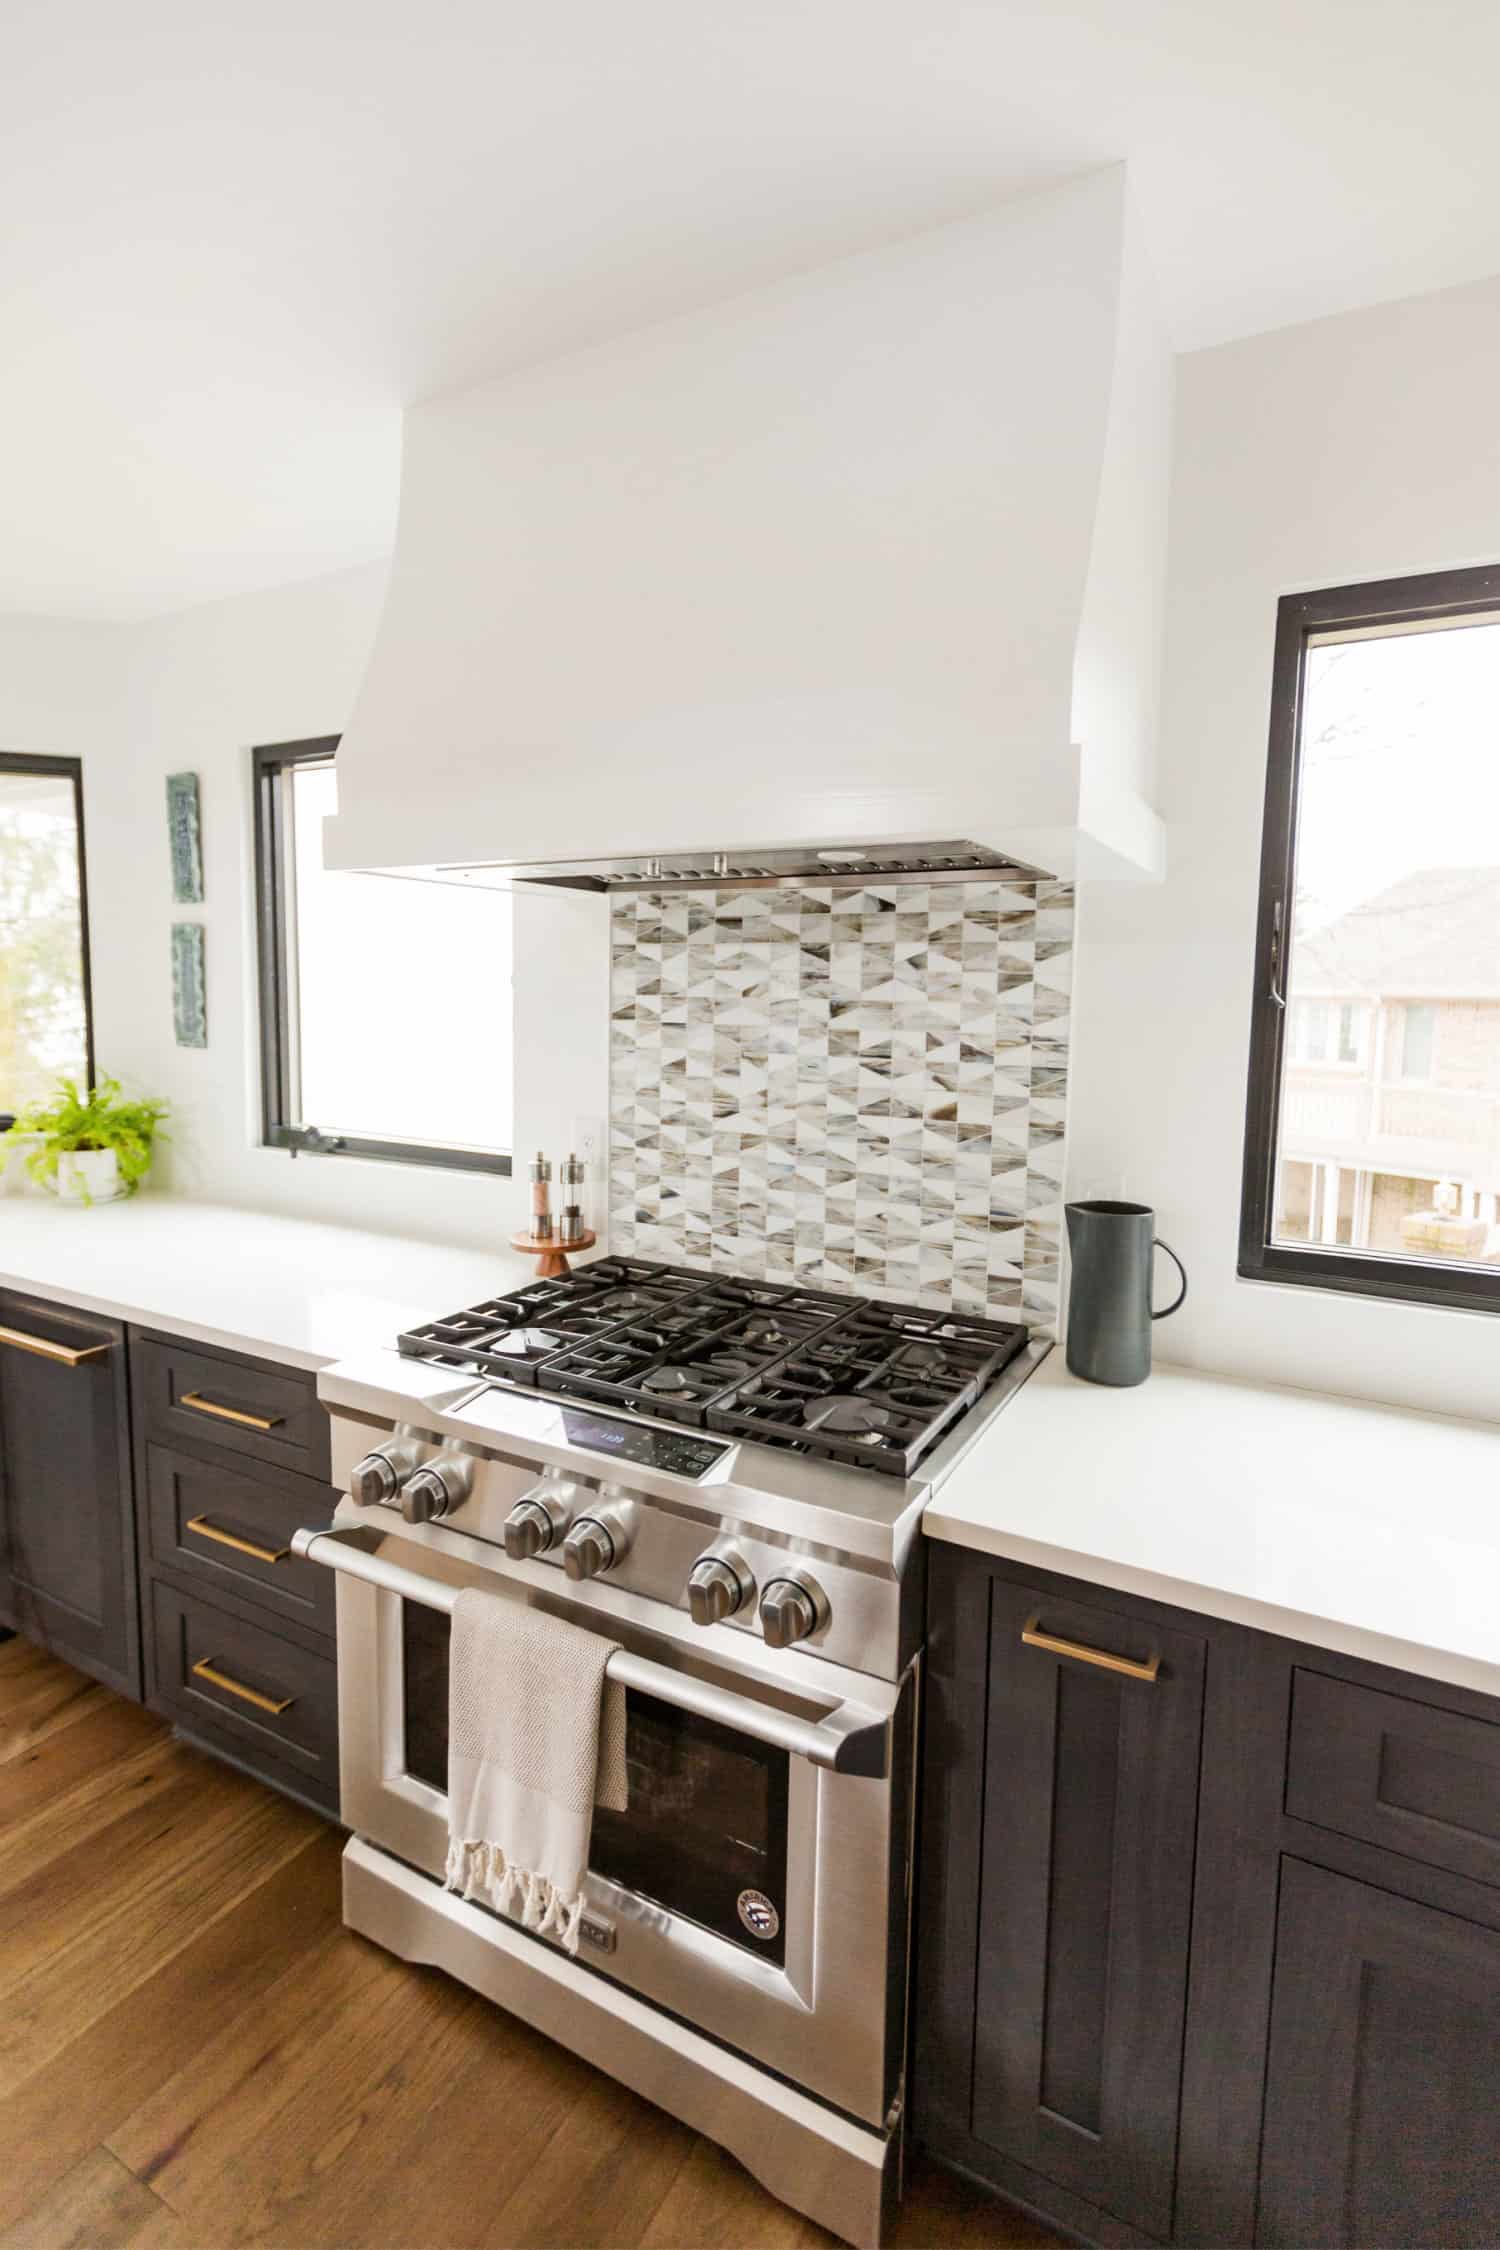 Nicholas Design Build | A remodeled kitchen with a stainless steel stove and white cabinets.